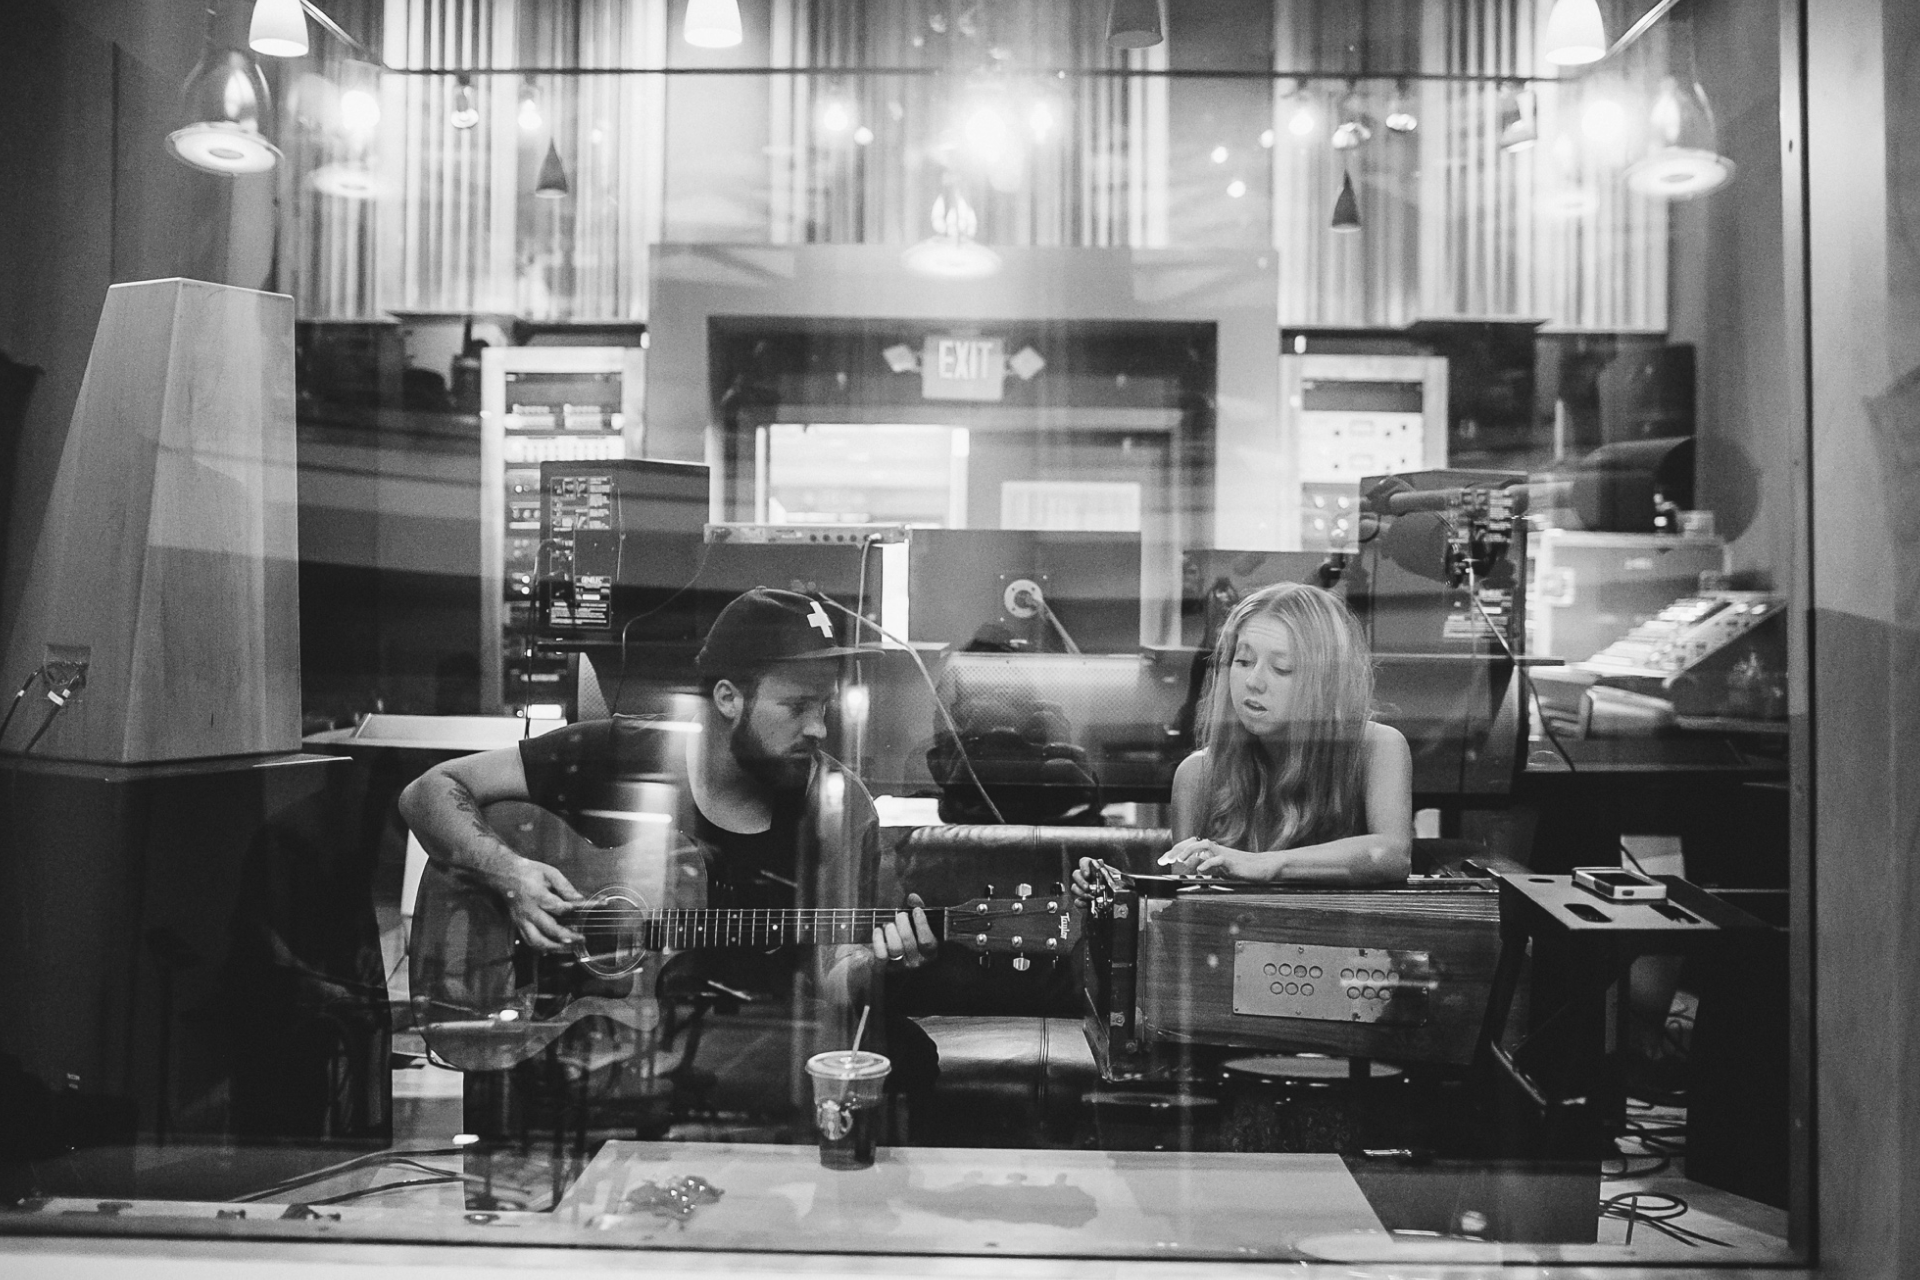 Tyler Madsen and Natalie record new music in a studio